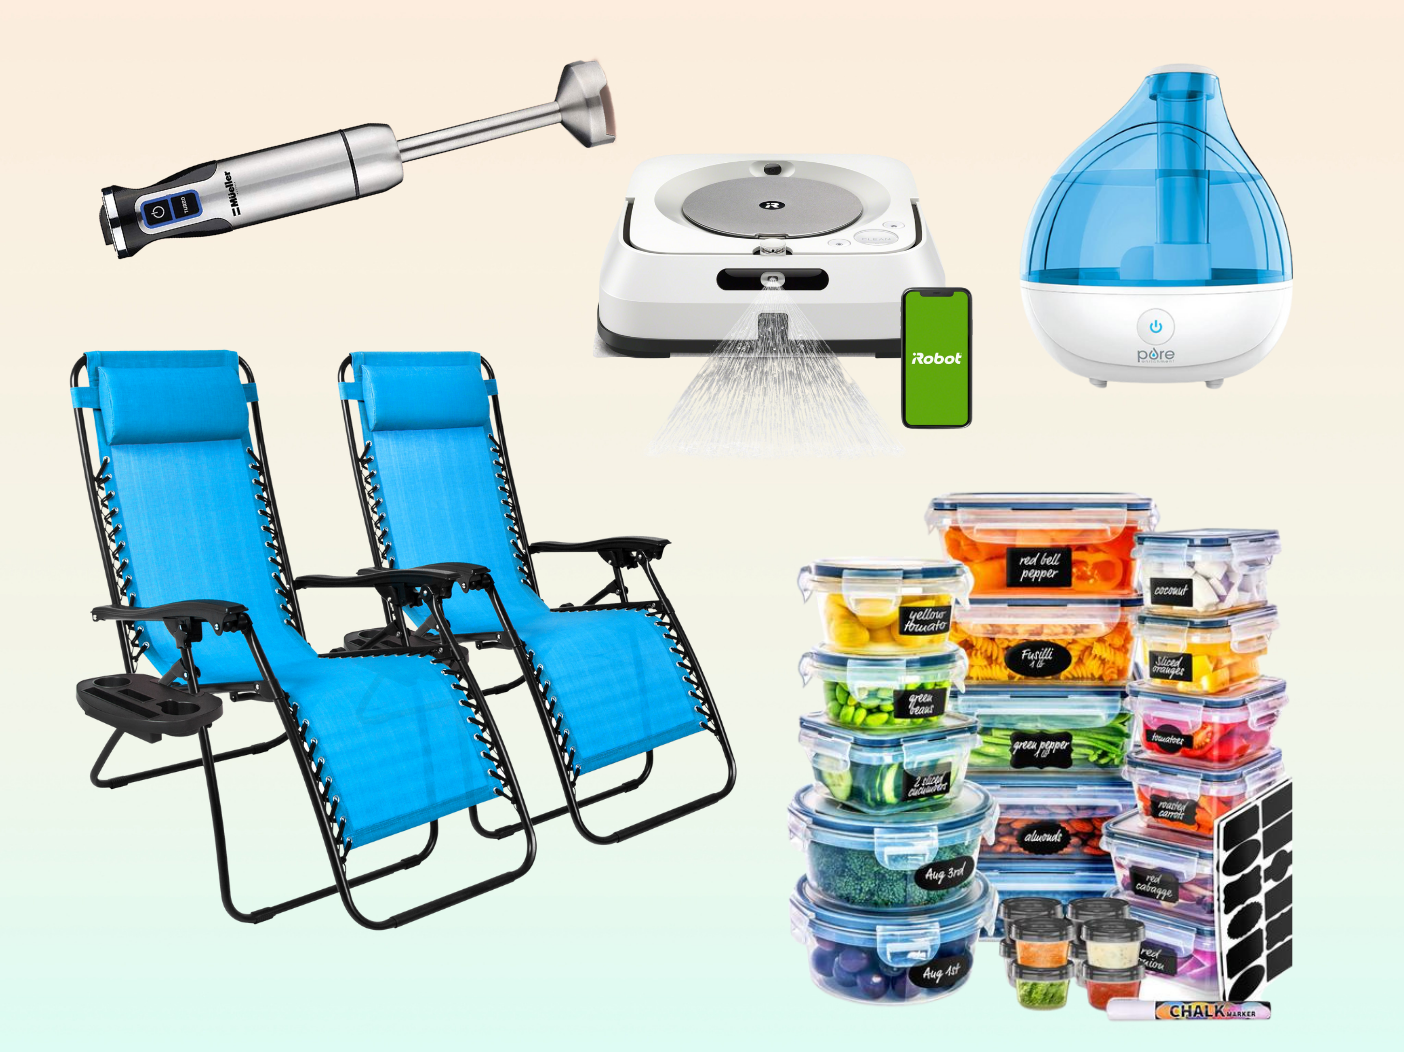 Collage of various home goods, left to right clockwise: immersion blender, robotic floor cleaner, humidifier, glass food containers, lounging chairs